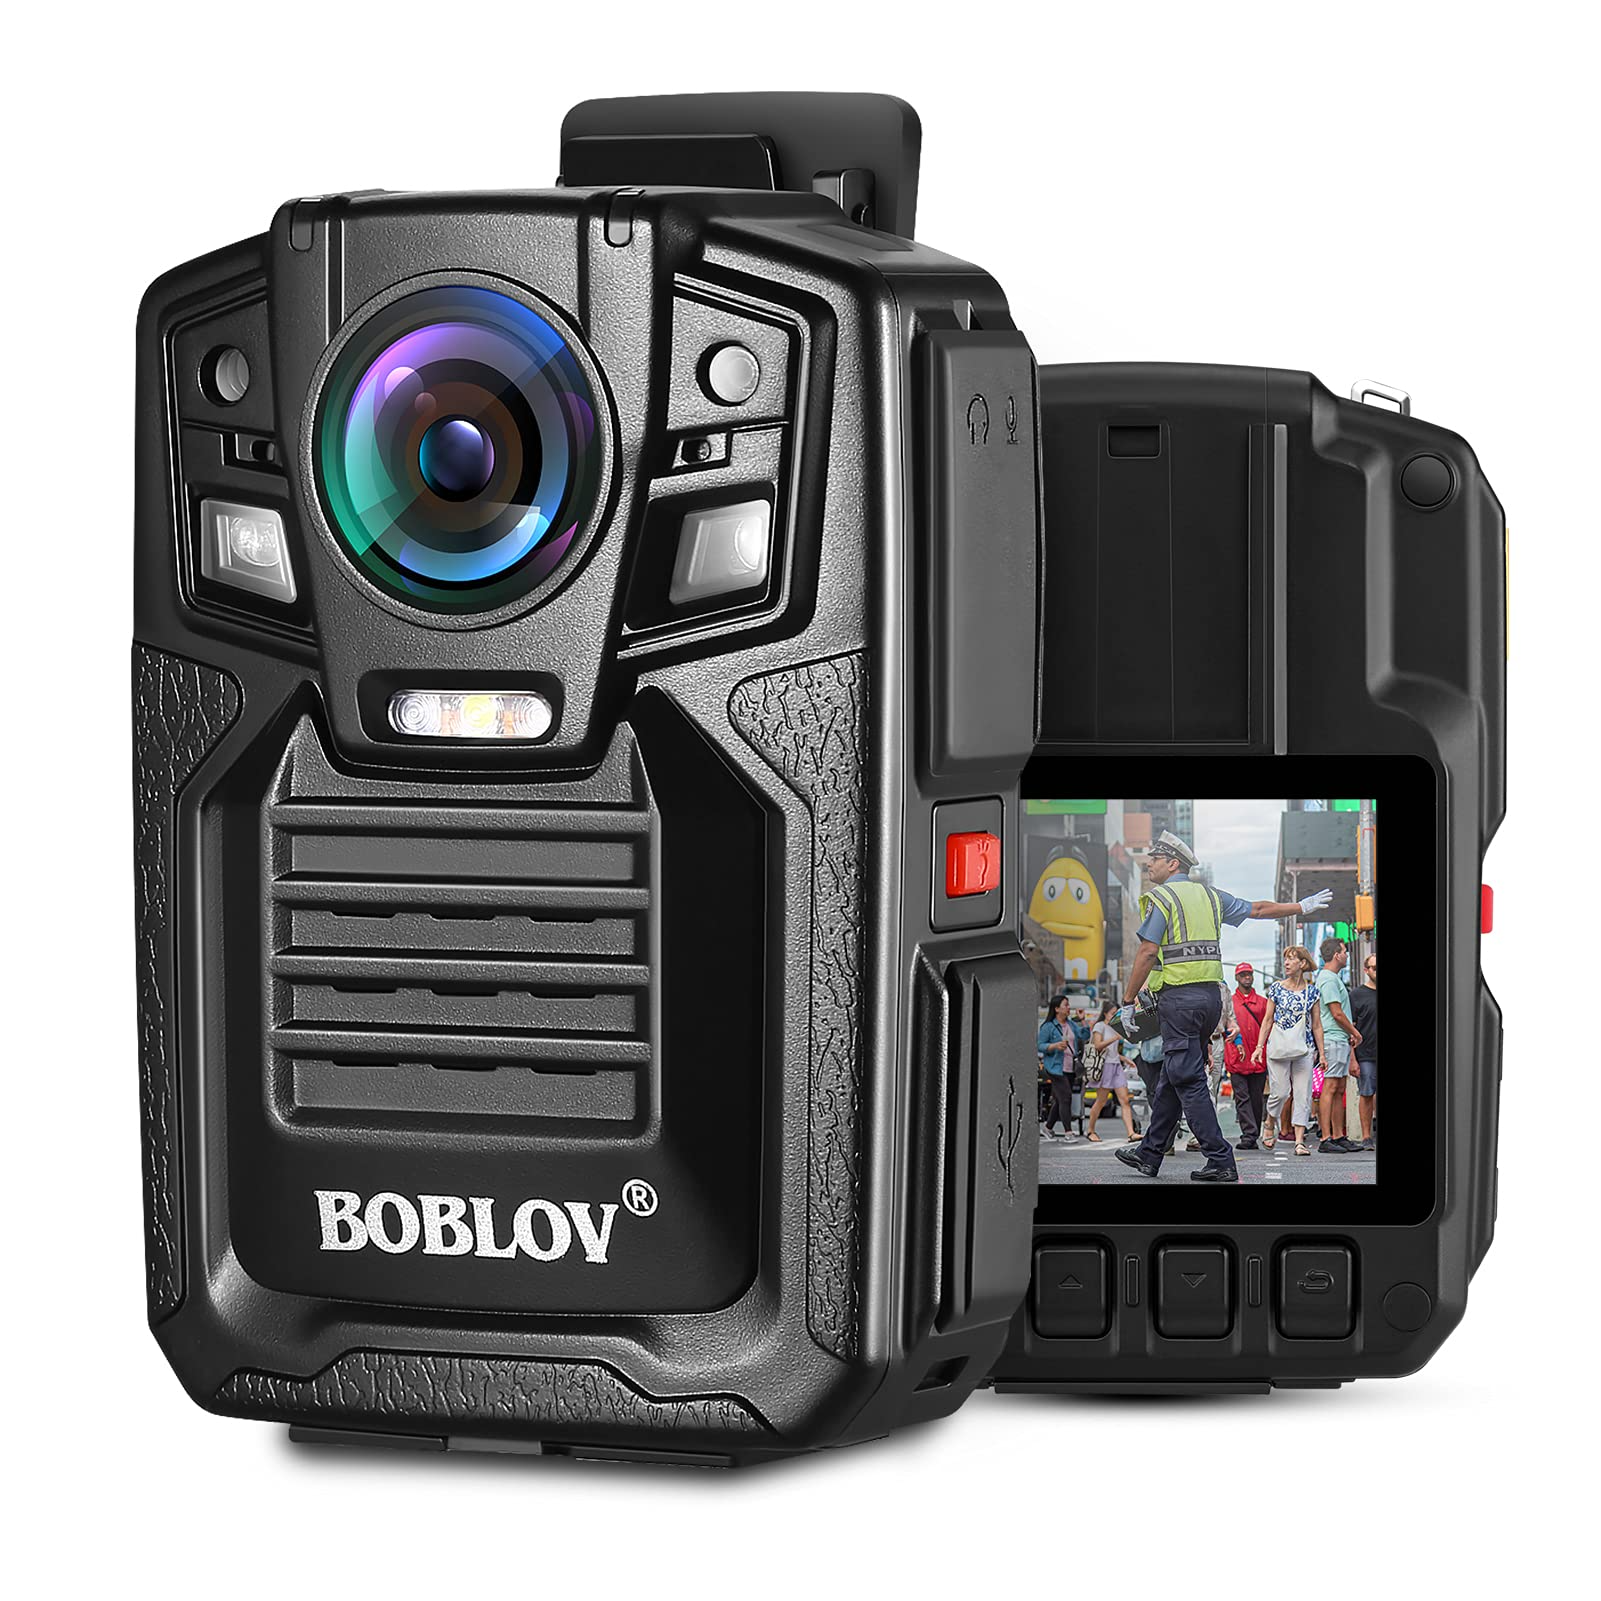 BOBLOV D7(HD66-02), 1296P Waterproof Police Body Camera with Night Vision